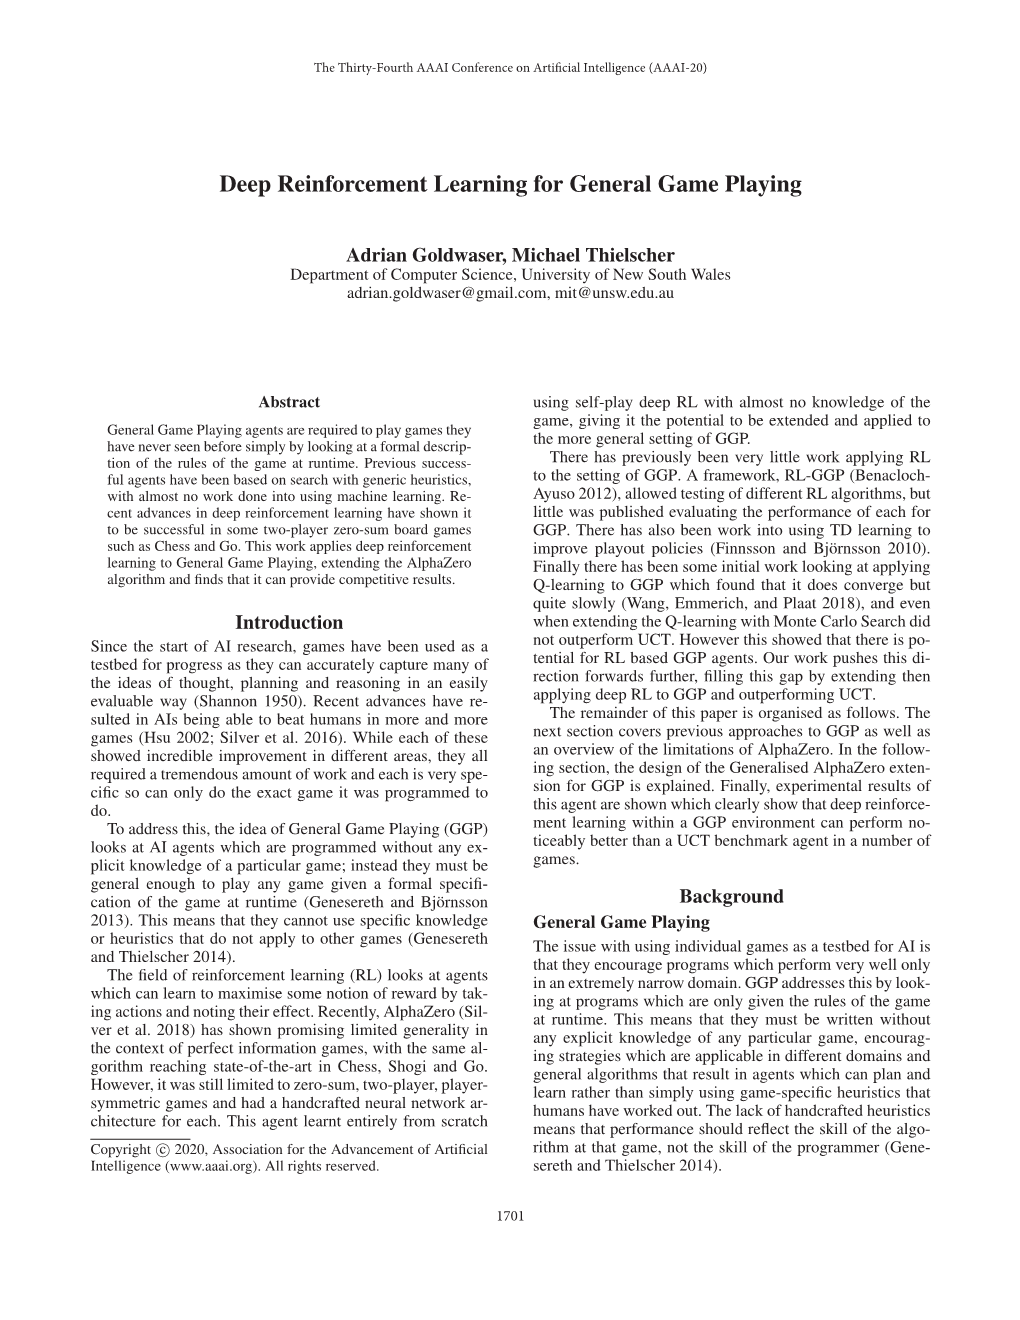 Deep Reinforcement Learning for General Game Playing